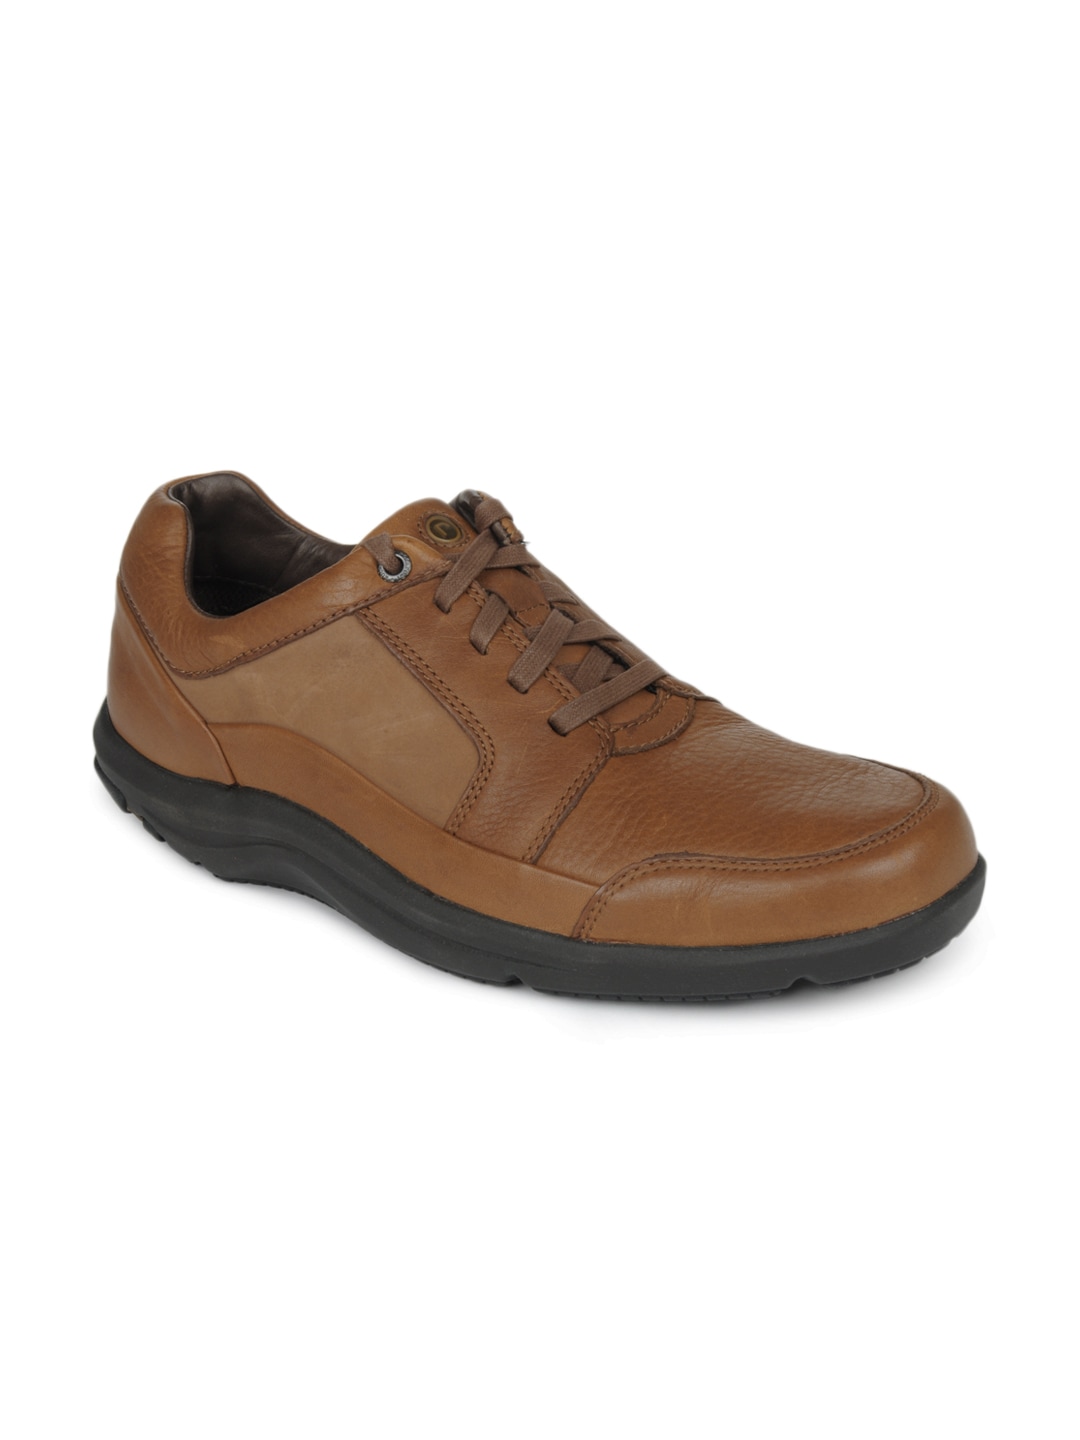 Rockport Men Brown Leather Casual Shoes